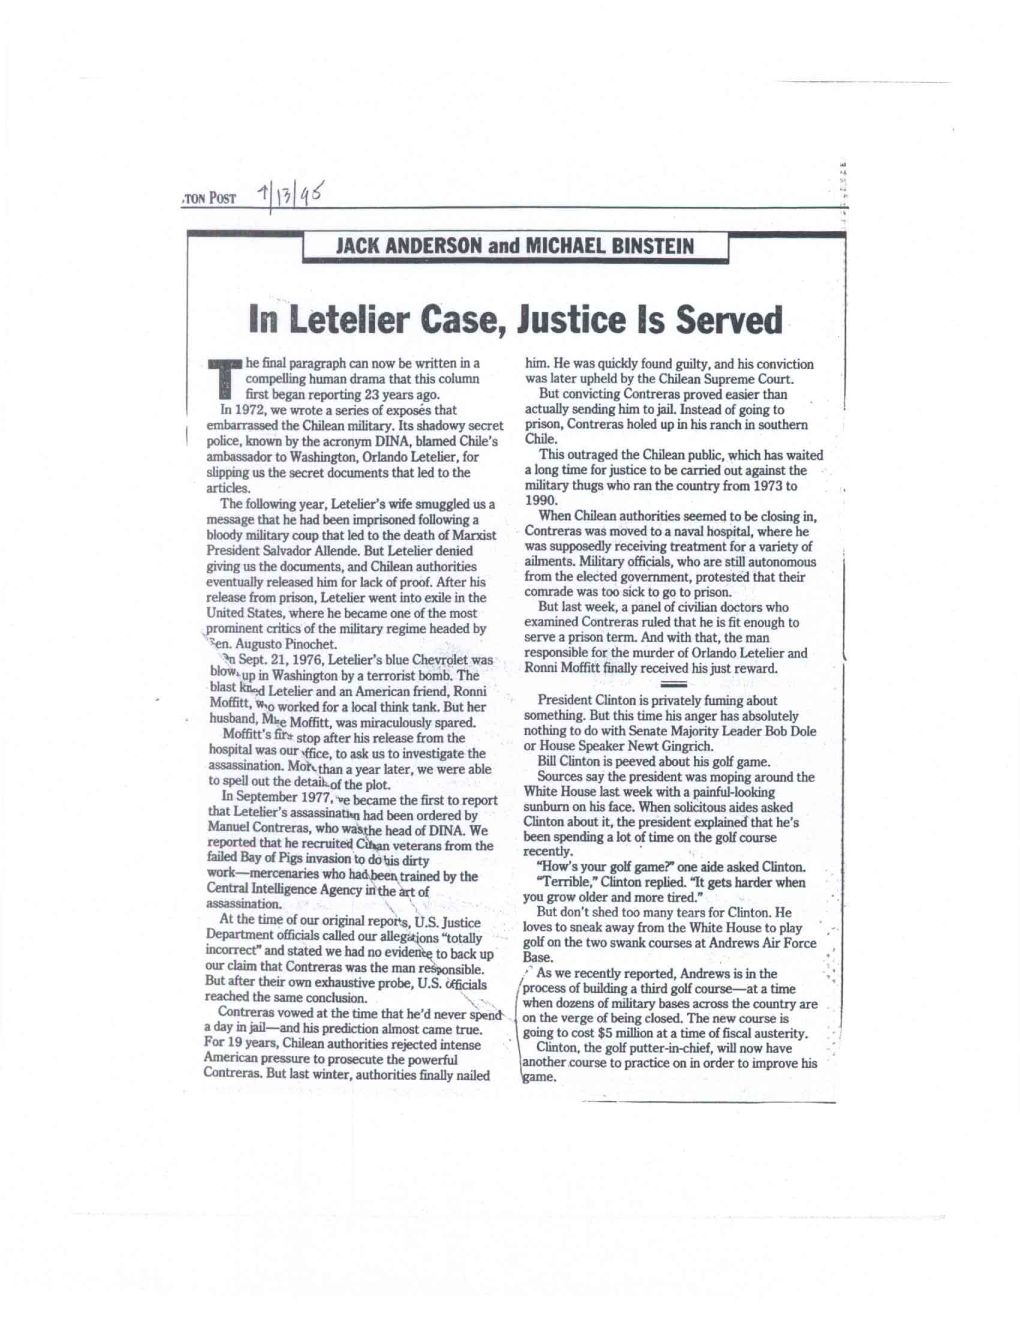 In Letelier Case, Justice Is Served